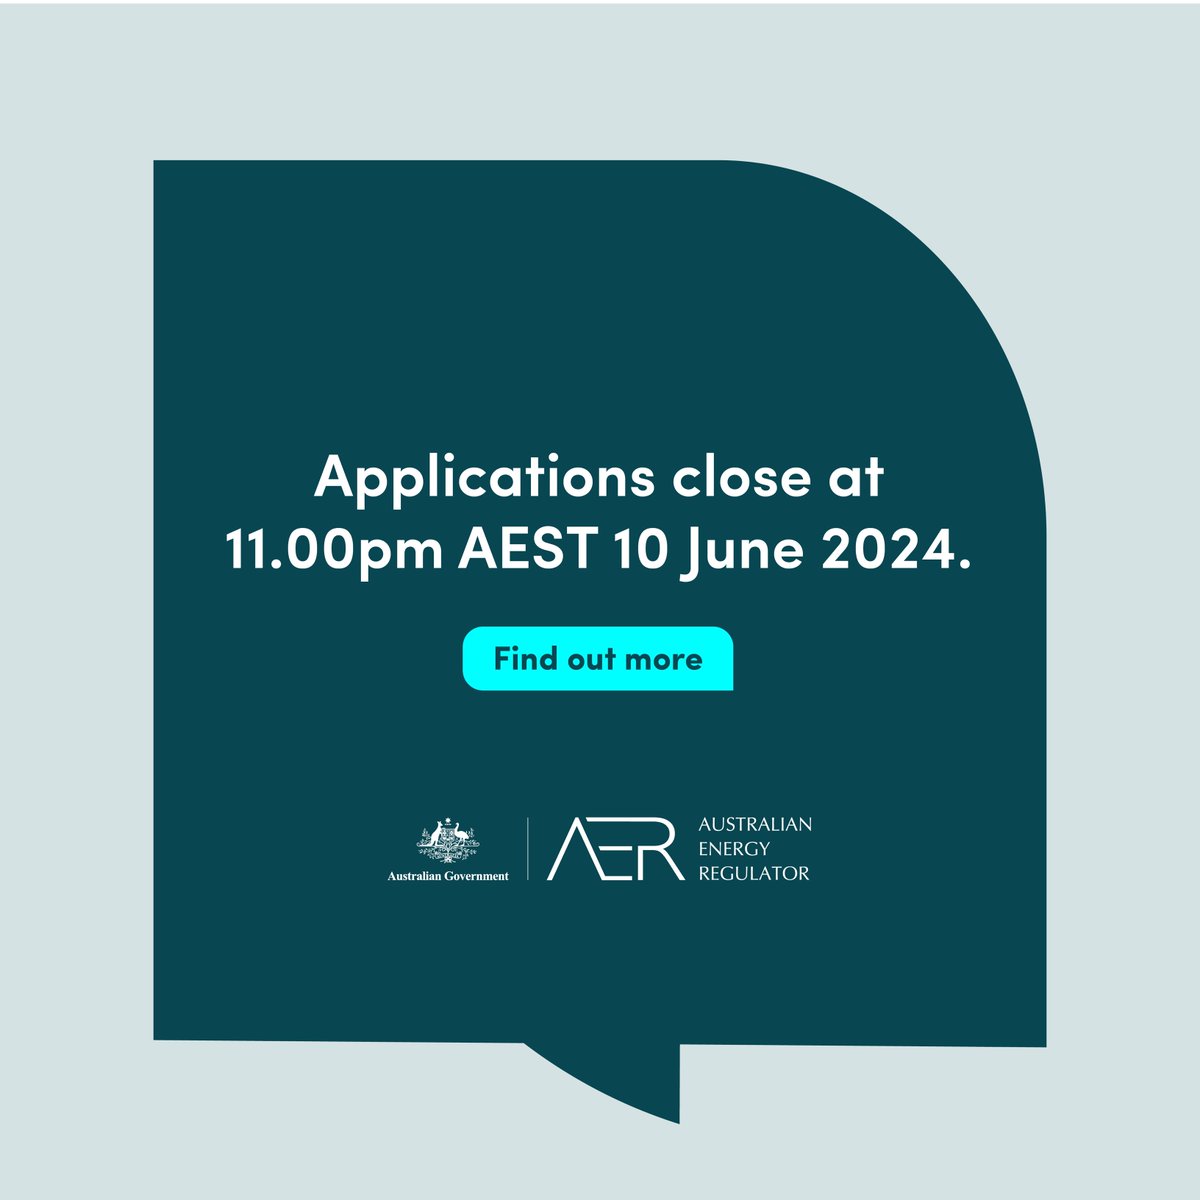 Recently graduated and ready to kick-start your career in energy? ⚡ Applications for the AER’s 2025 Graduate Program are closing on Monday 10 June 2024: lnkd.in/gPswNn9a

#GraduateJobs #APSJobs #PublicService #Employment #GradProgram #WeAreAER